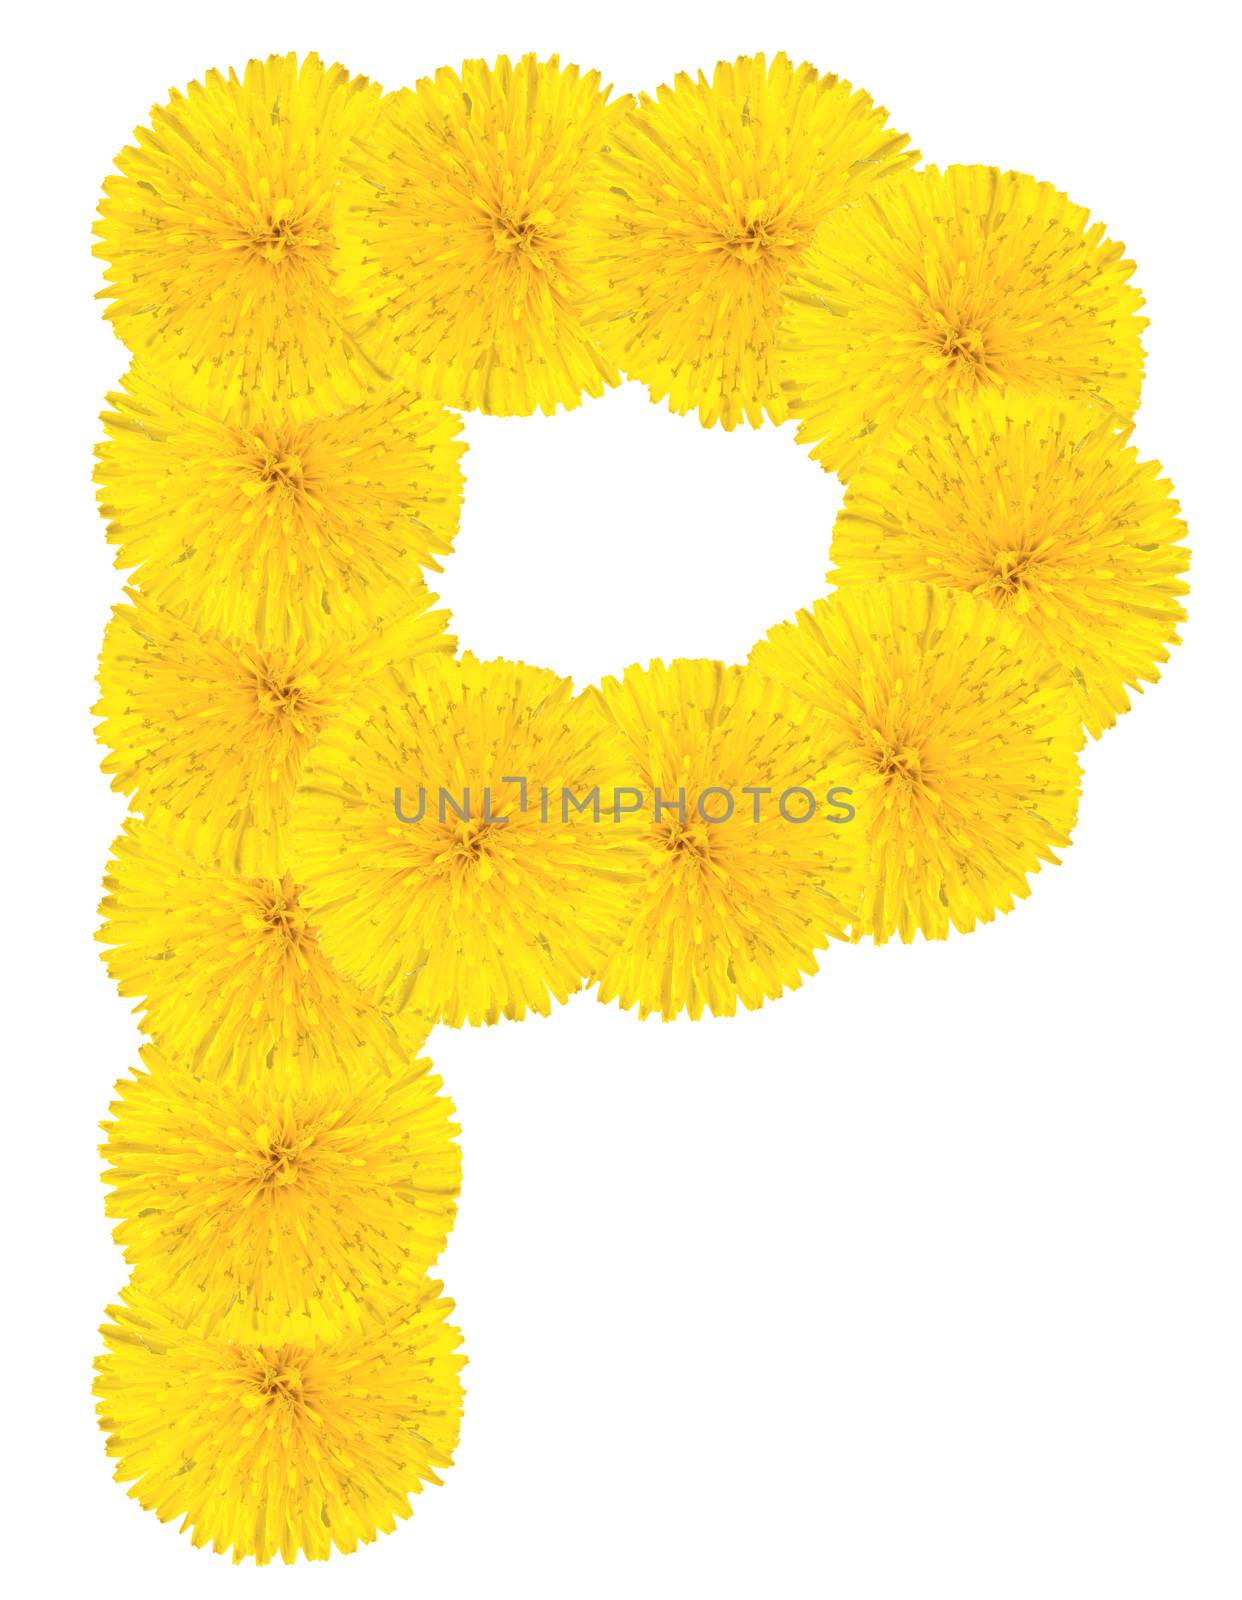 Letter P made from dandelion flowers isolated on white background